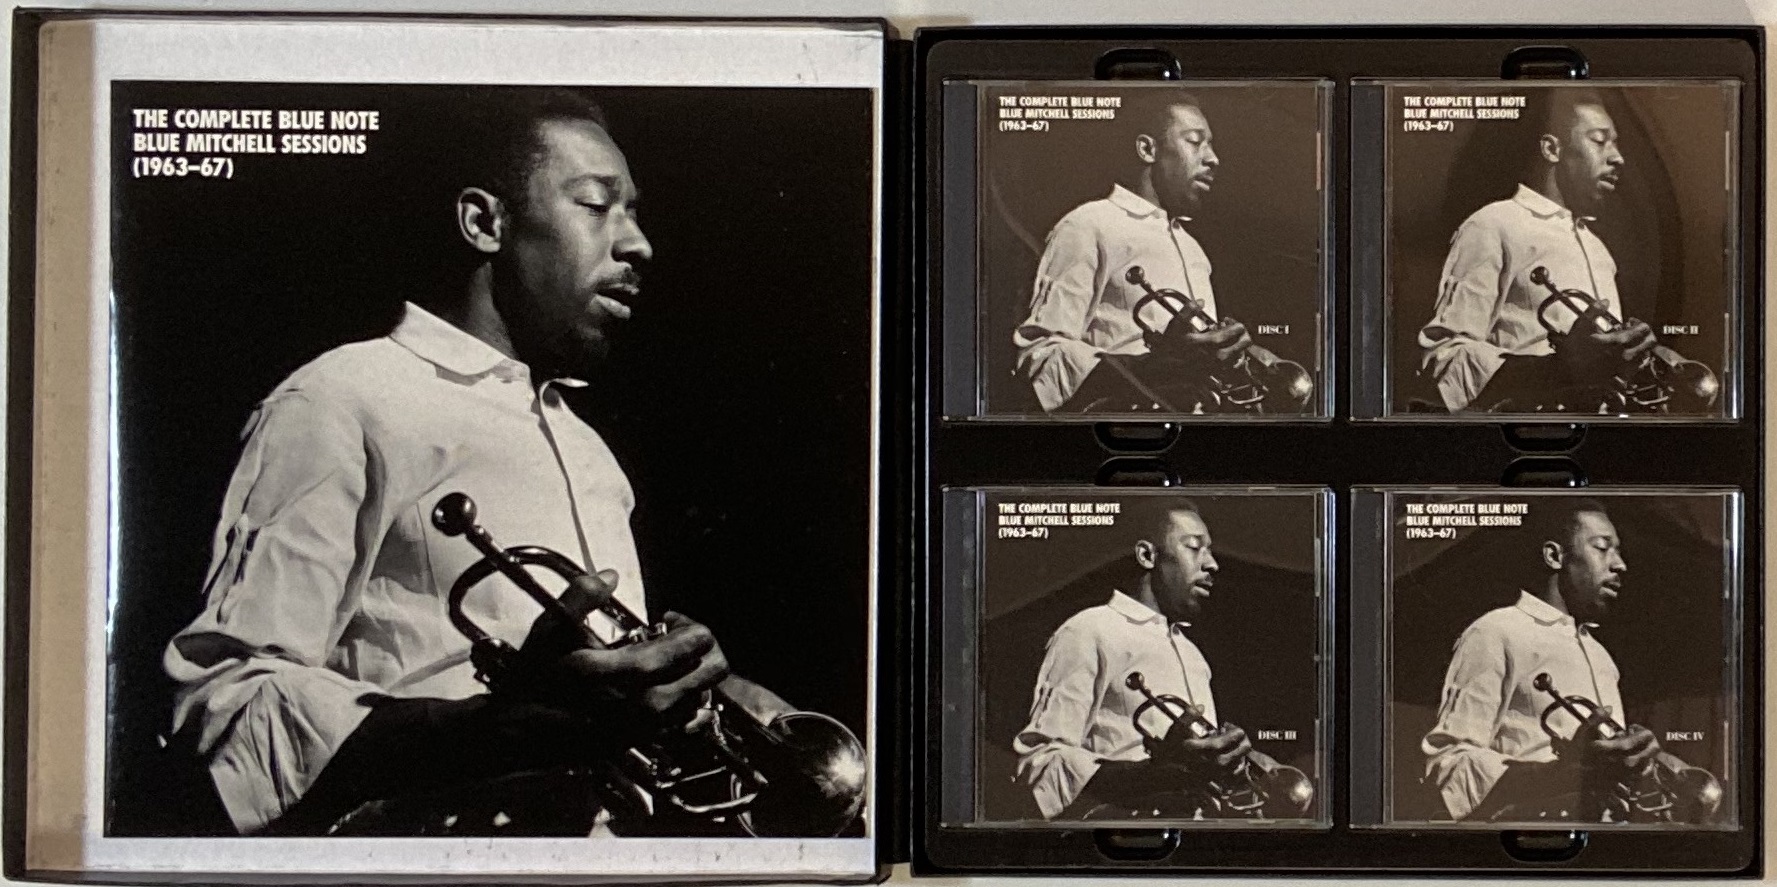 Lot 40 BLUE MITCHELL THE COMPLETE BLUE NOTE